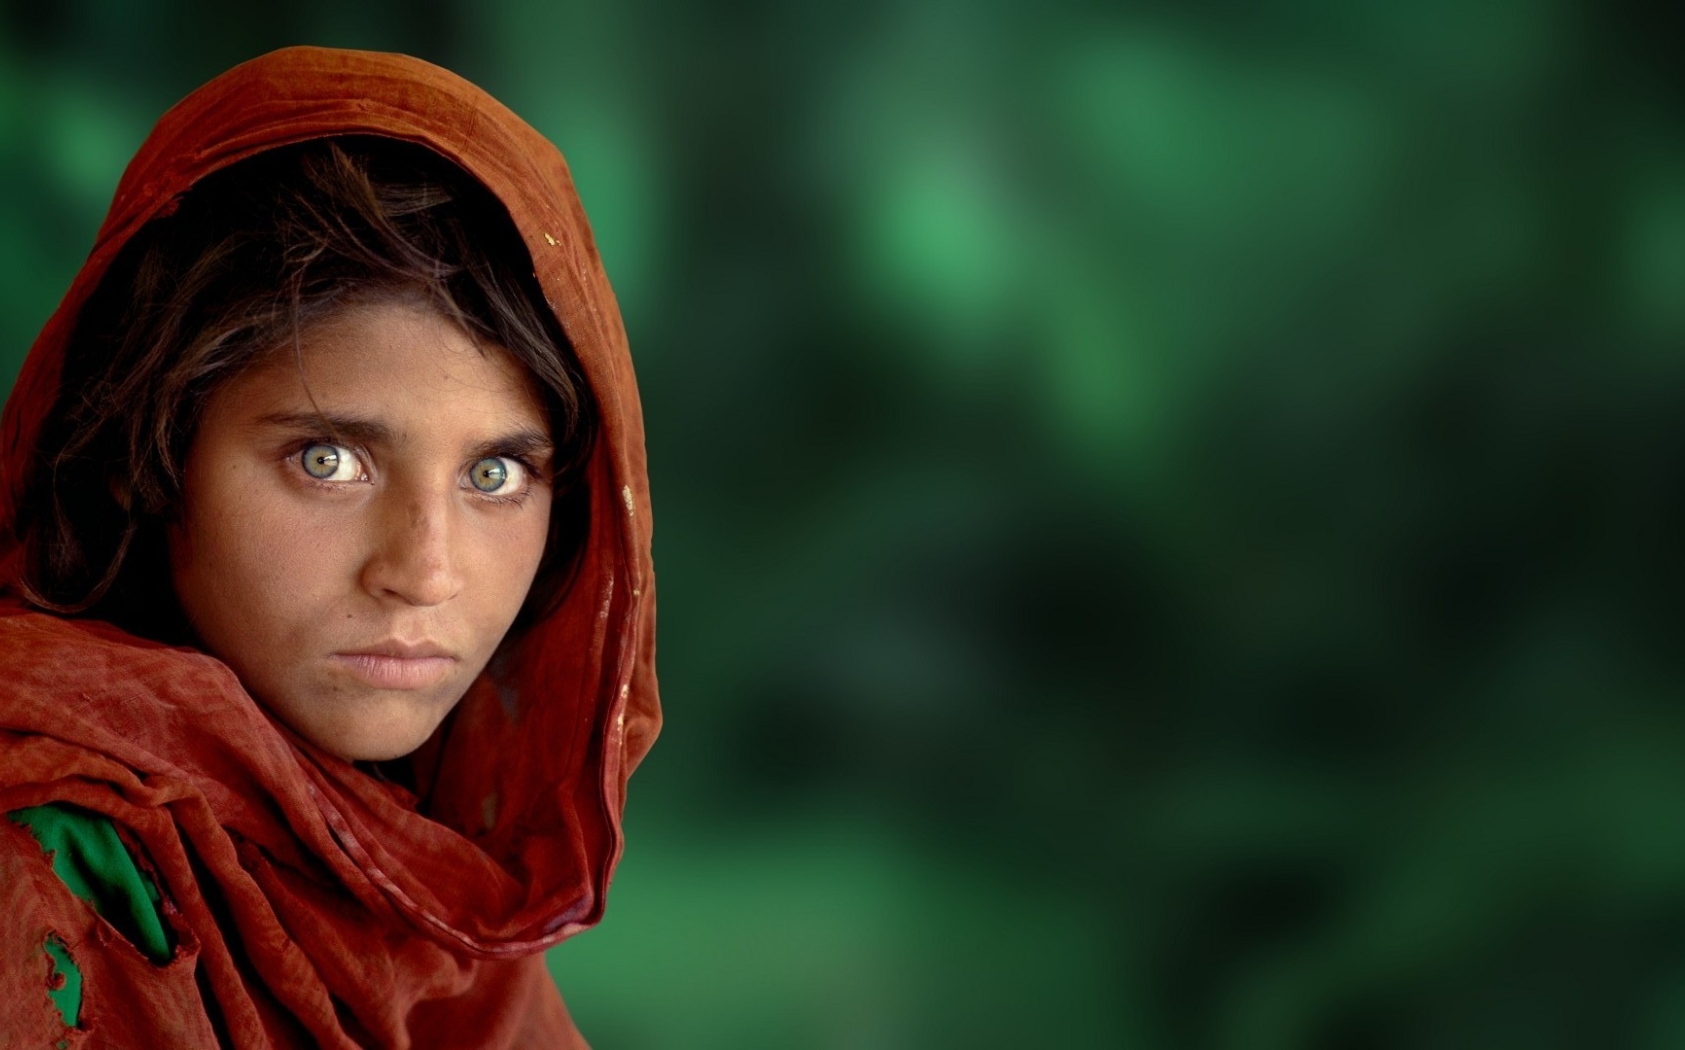 Afghan girl photo wallpapers and images   wallpapers pictures photos 1685x1050